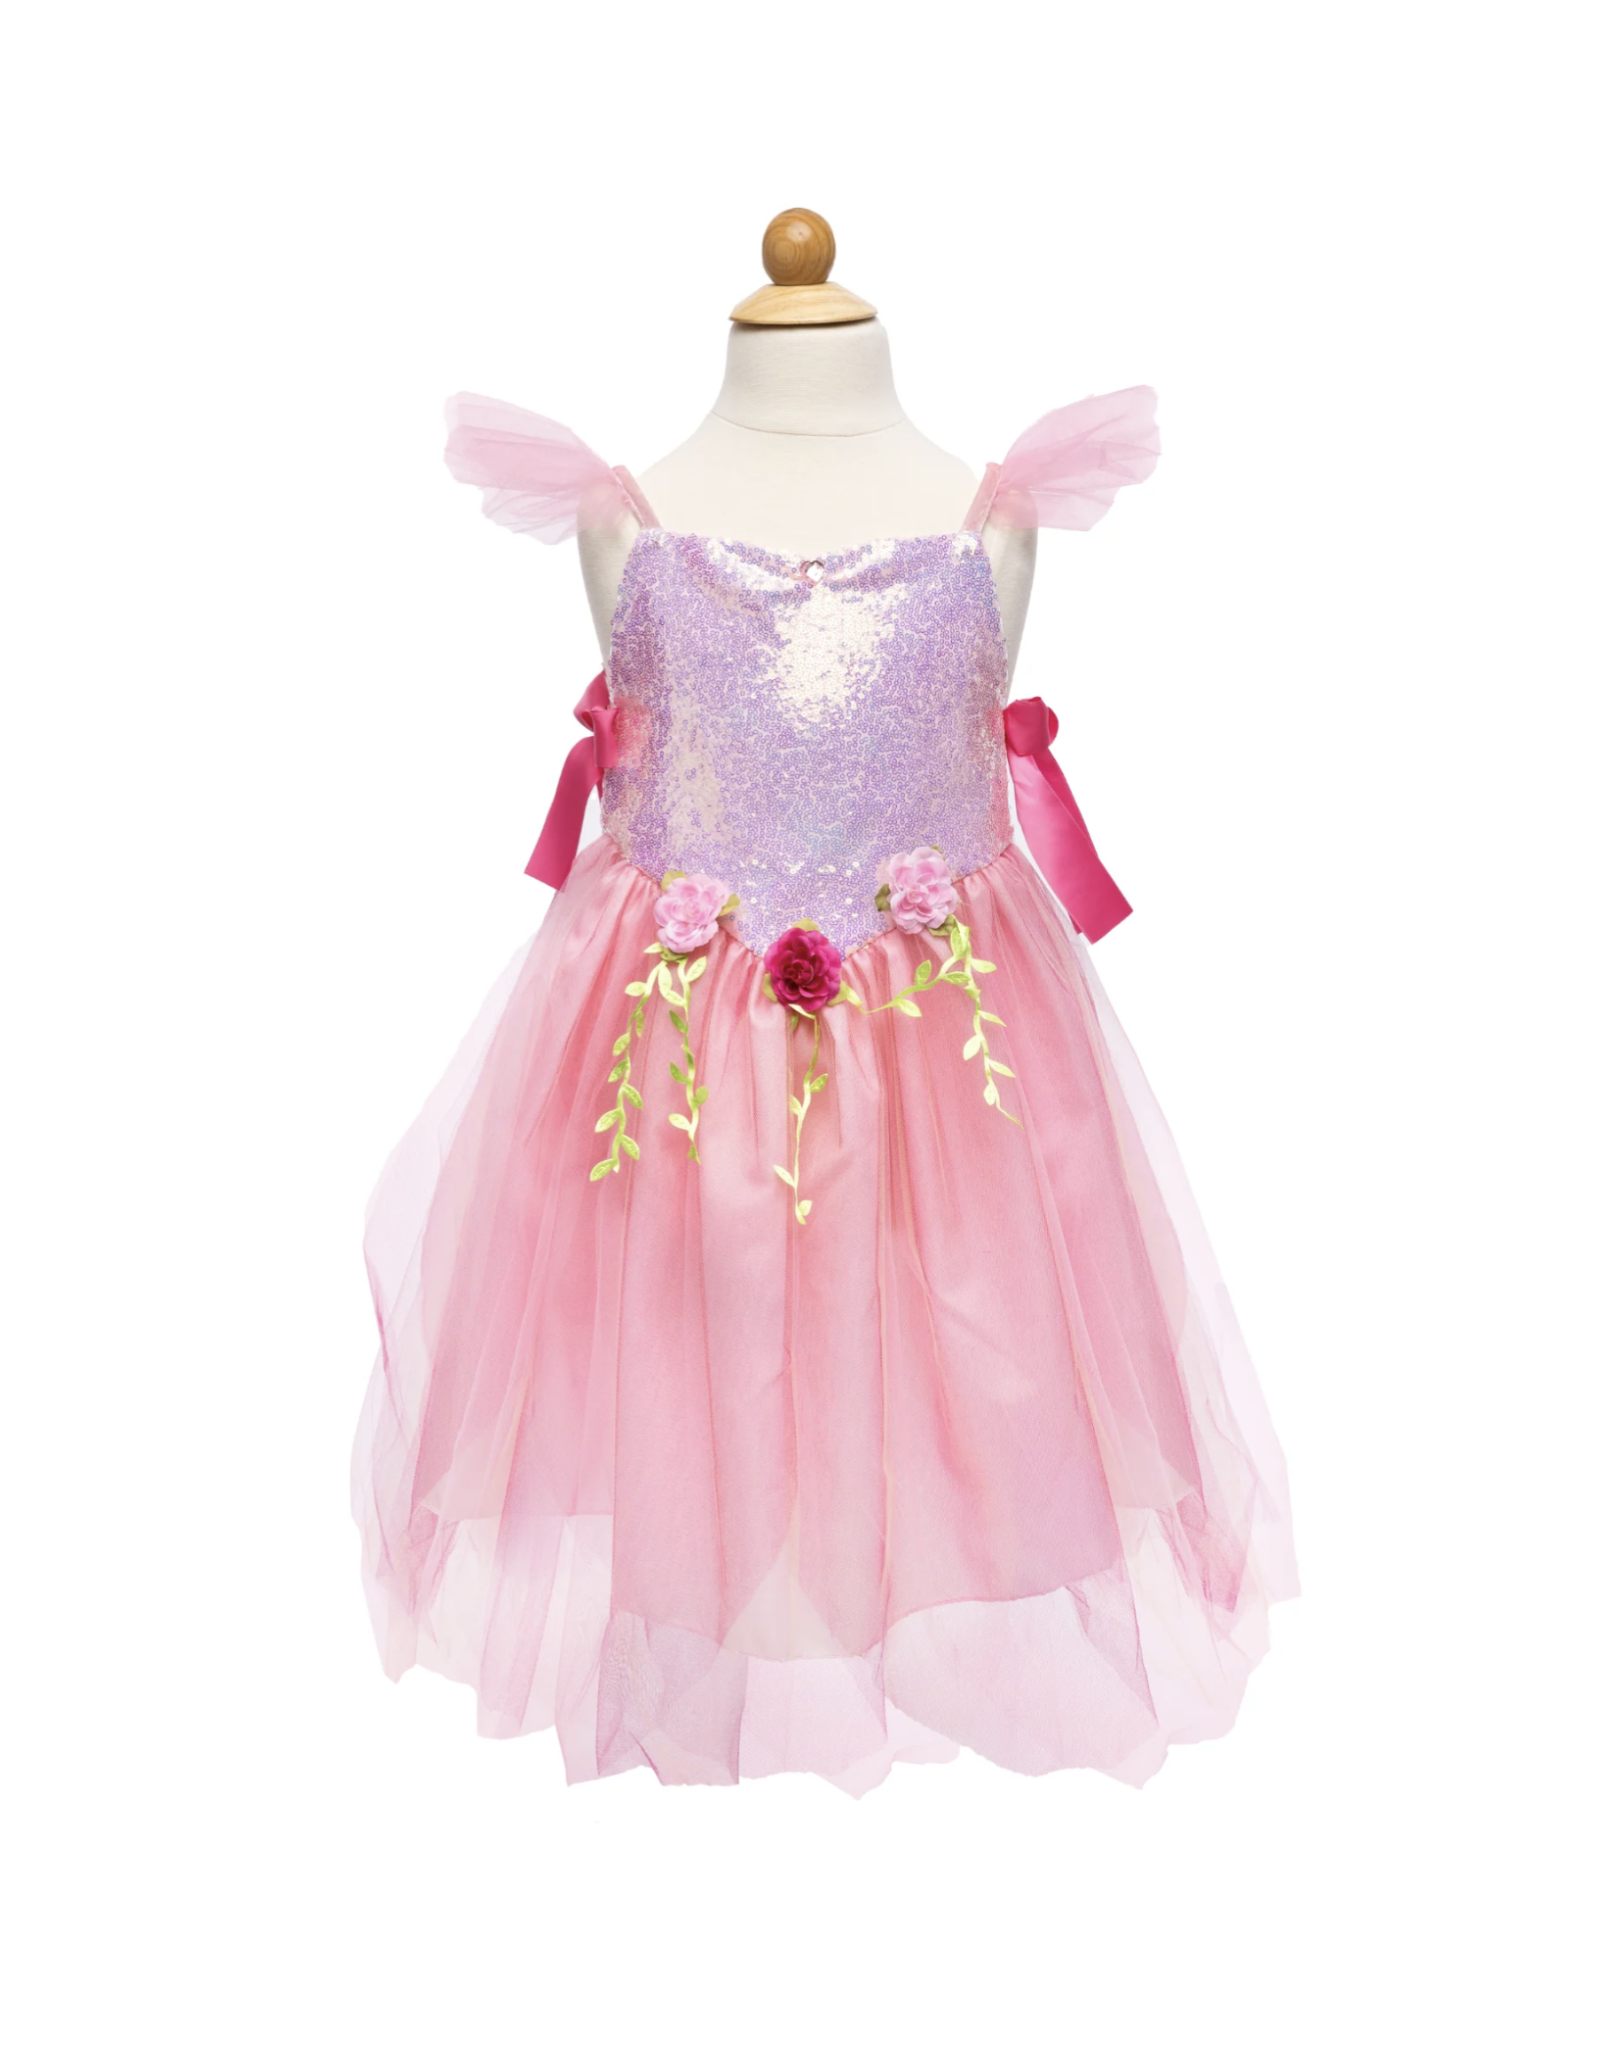 Great Pretenders Pink Sequins Fairy Tunic, Size 5/6